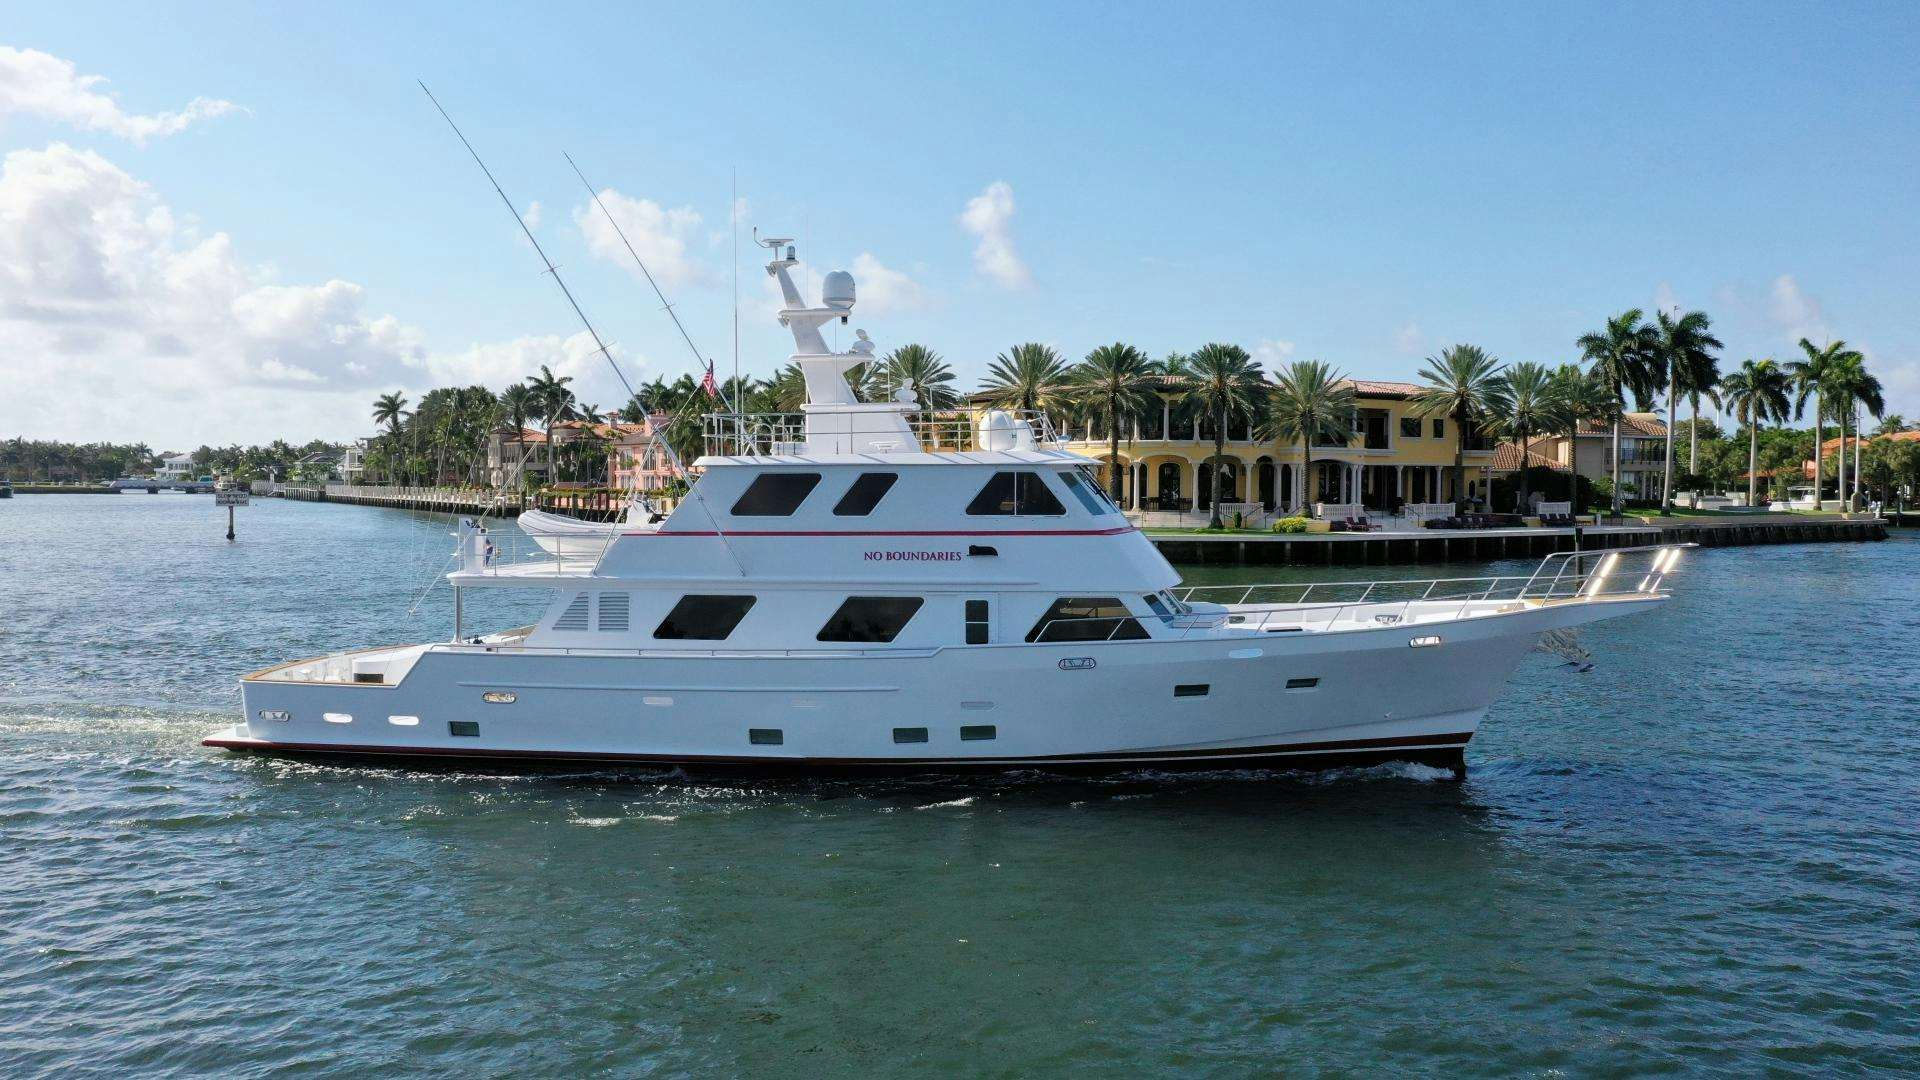 Watch Video for NO BOUNDARIES Yacht for Sale